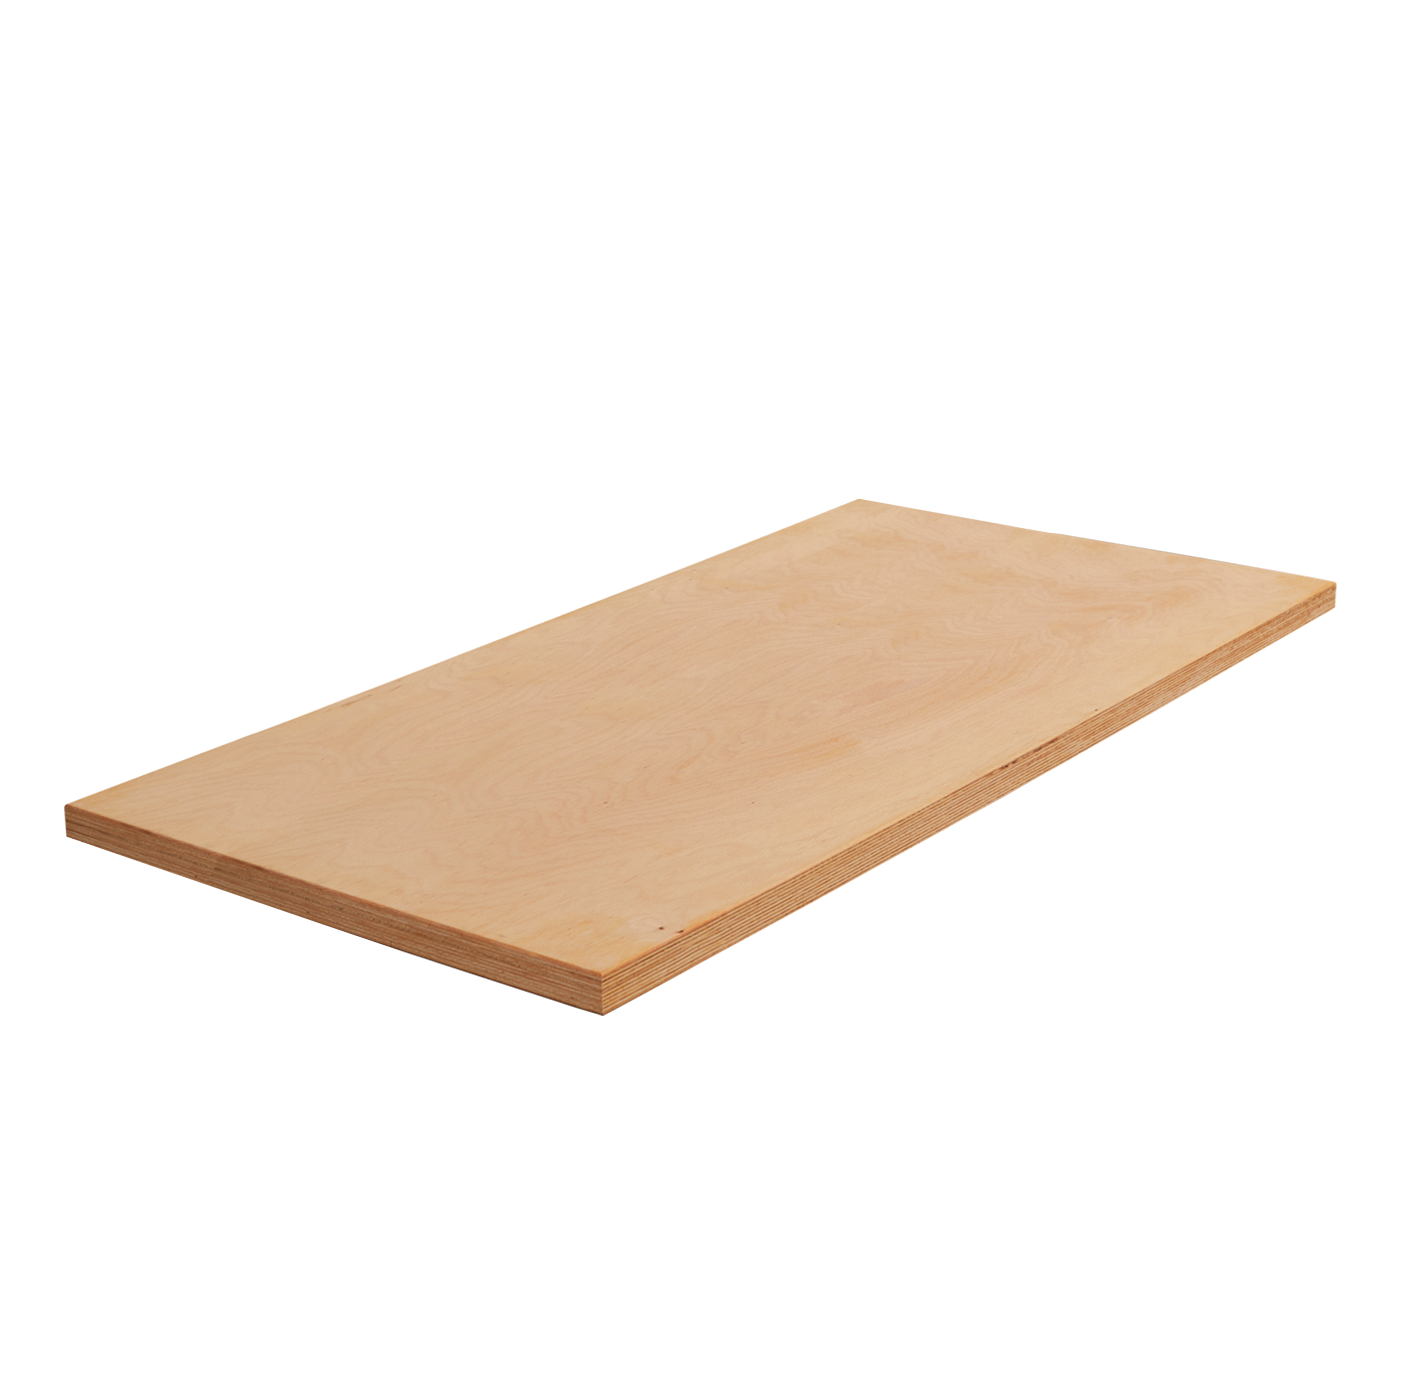 Beech plywood bench top for 2 pieces of furniture -1360*690